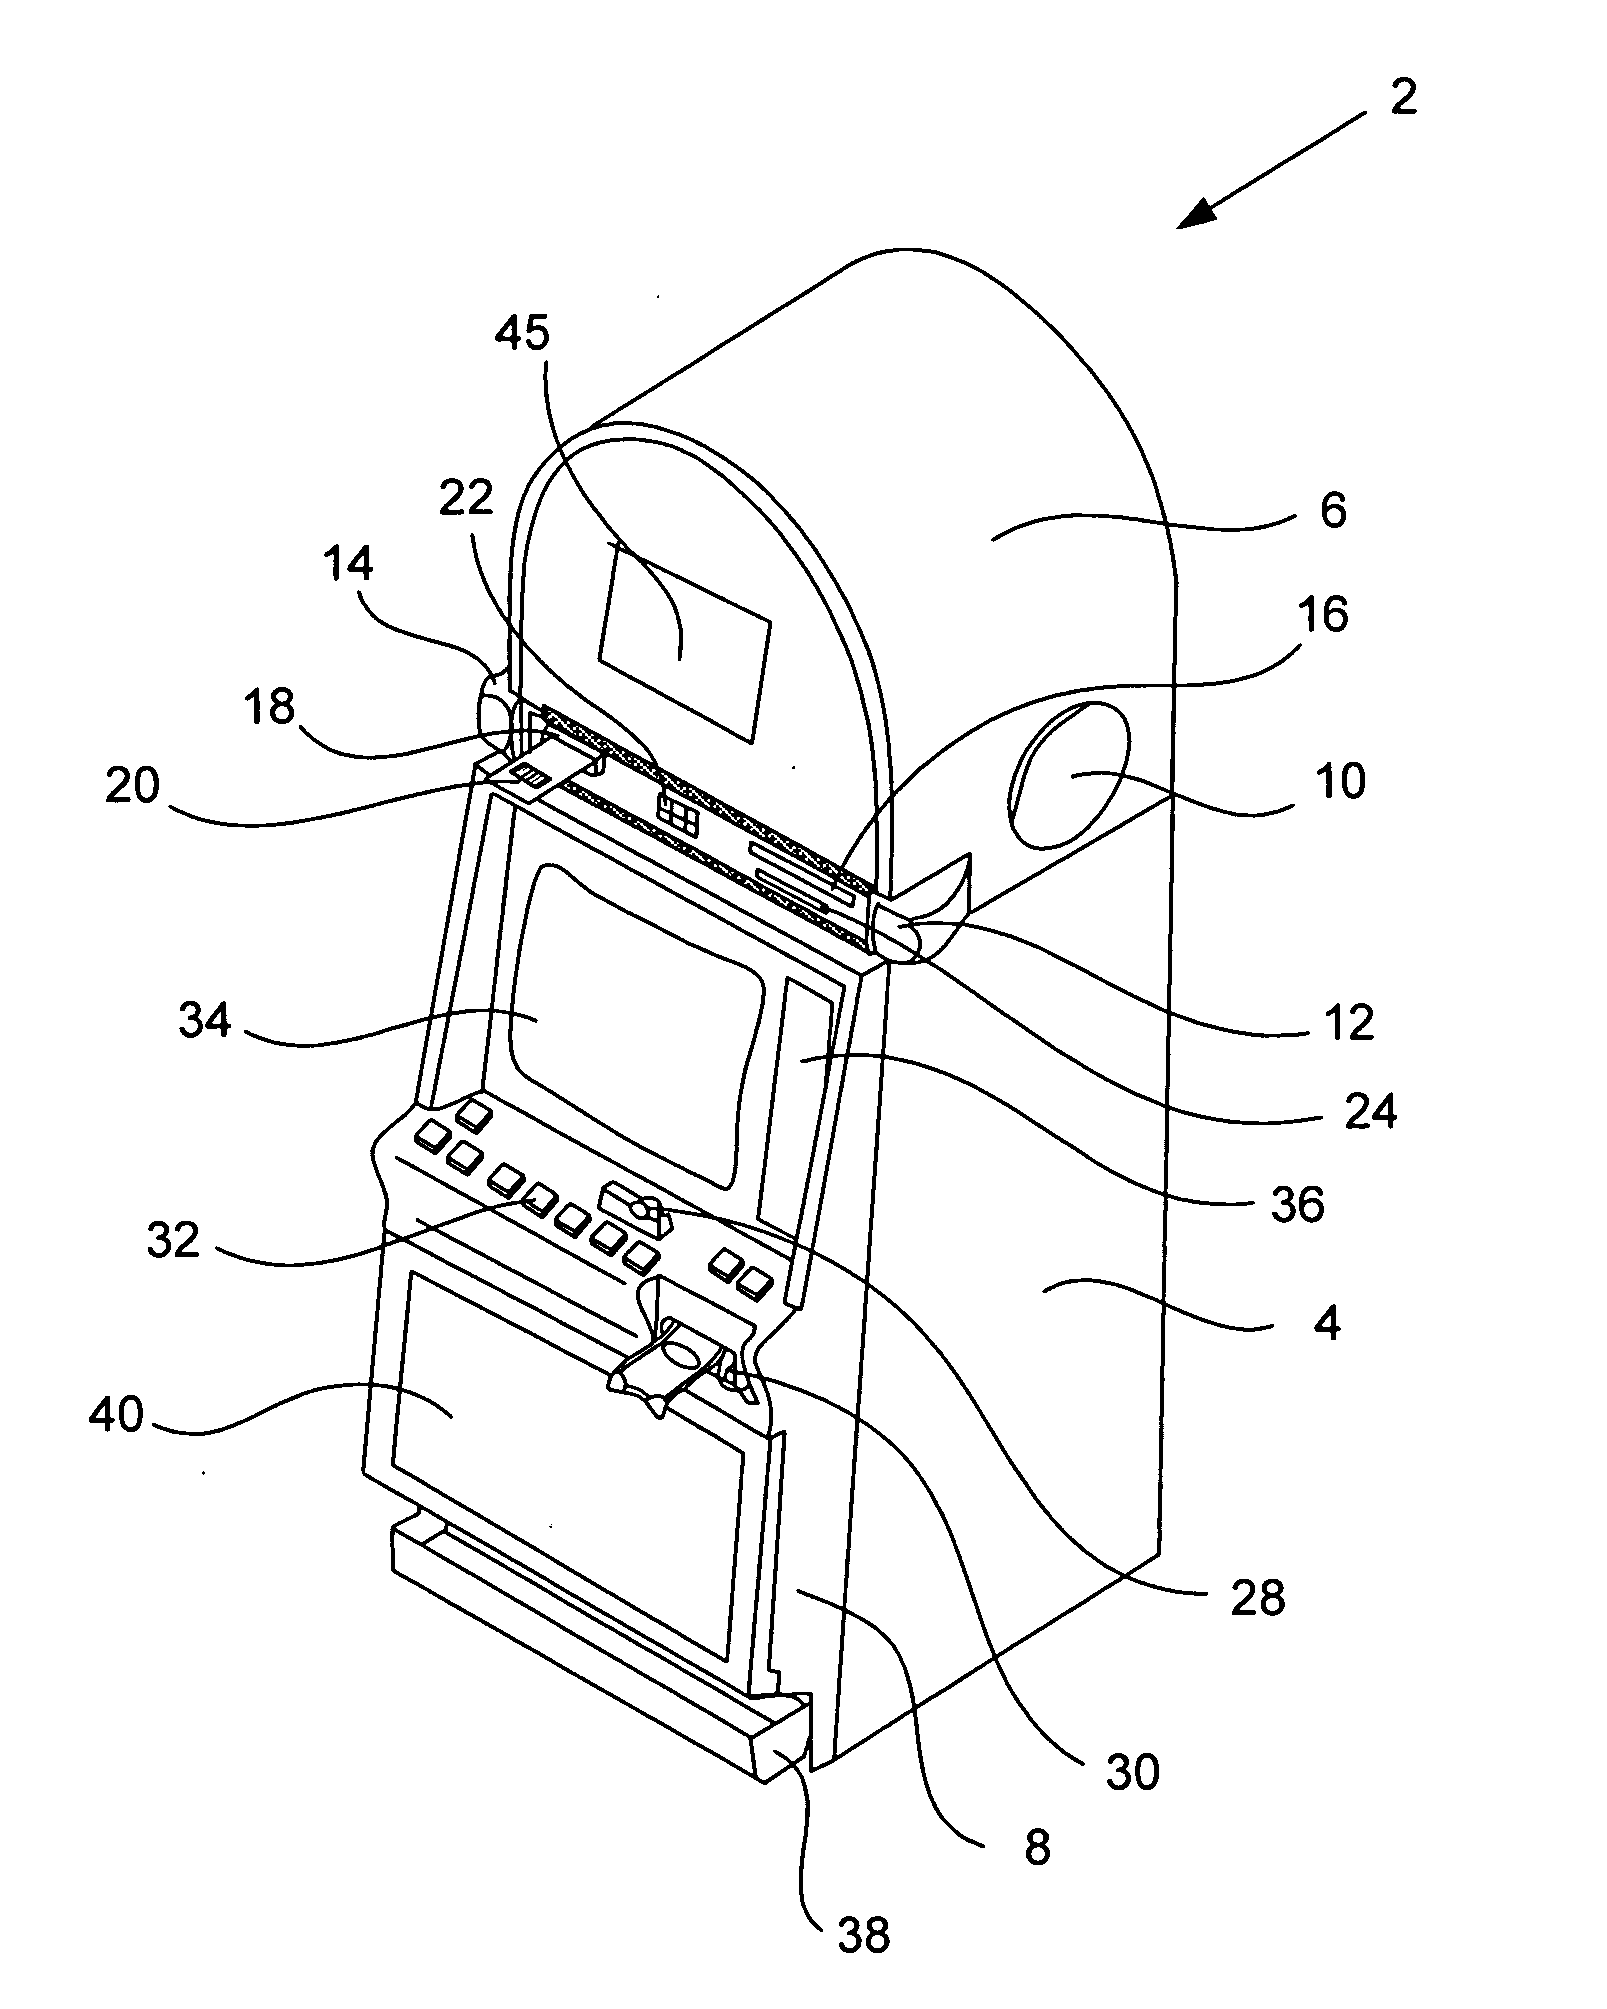 Shock prevention device and system for display